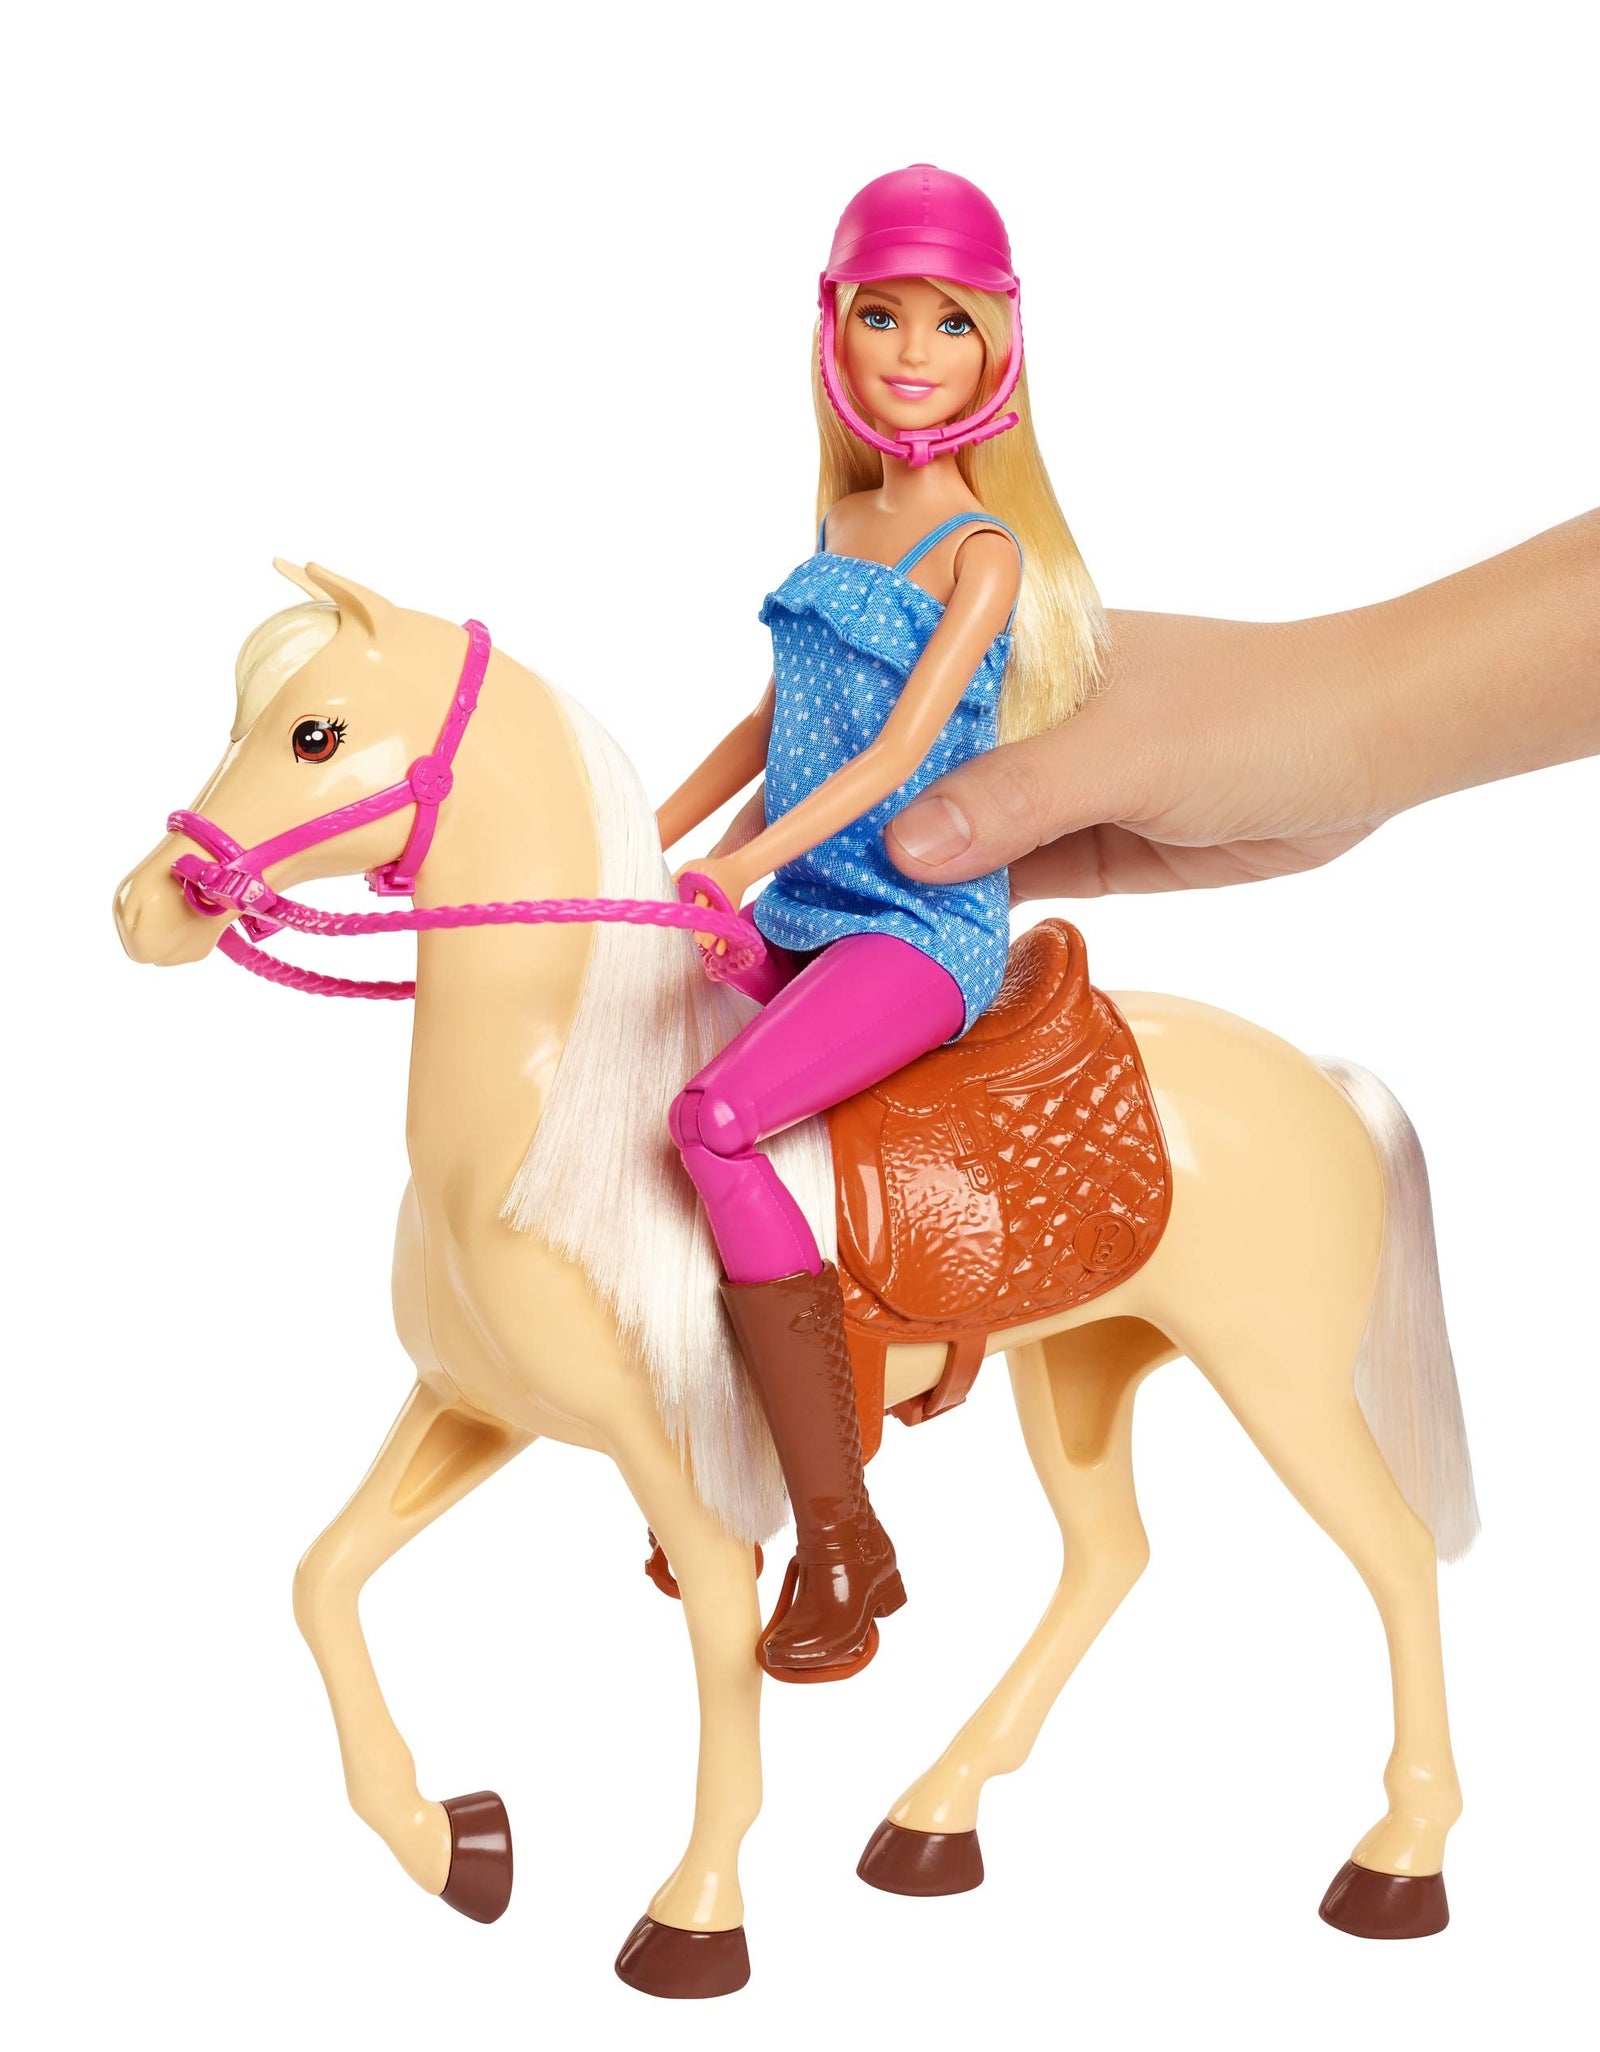 Barbie Doll, Blonde, Wearing Riding Outfit with Helmet, and Light Brown Horse with Soft White Mane and Tail, Gift for 3 to 7 Year Olds